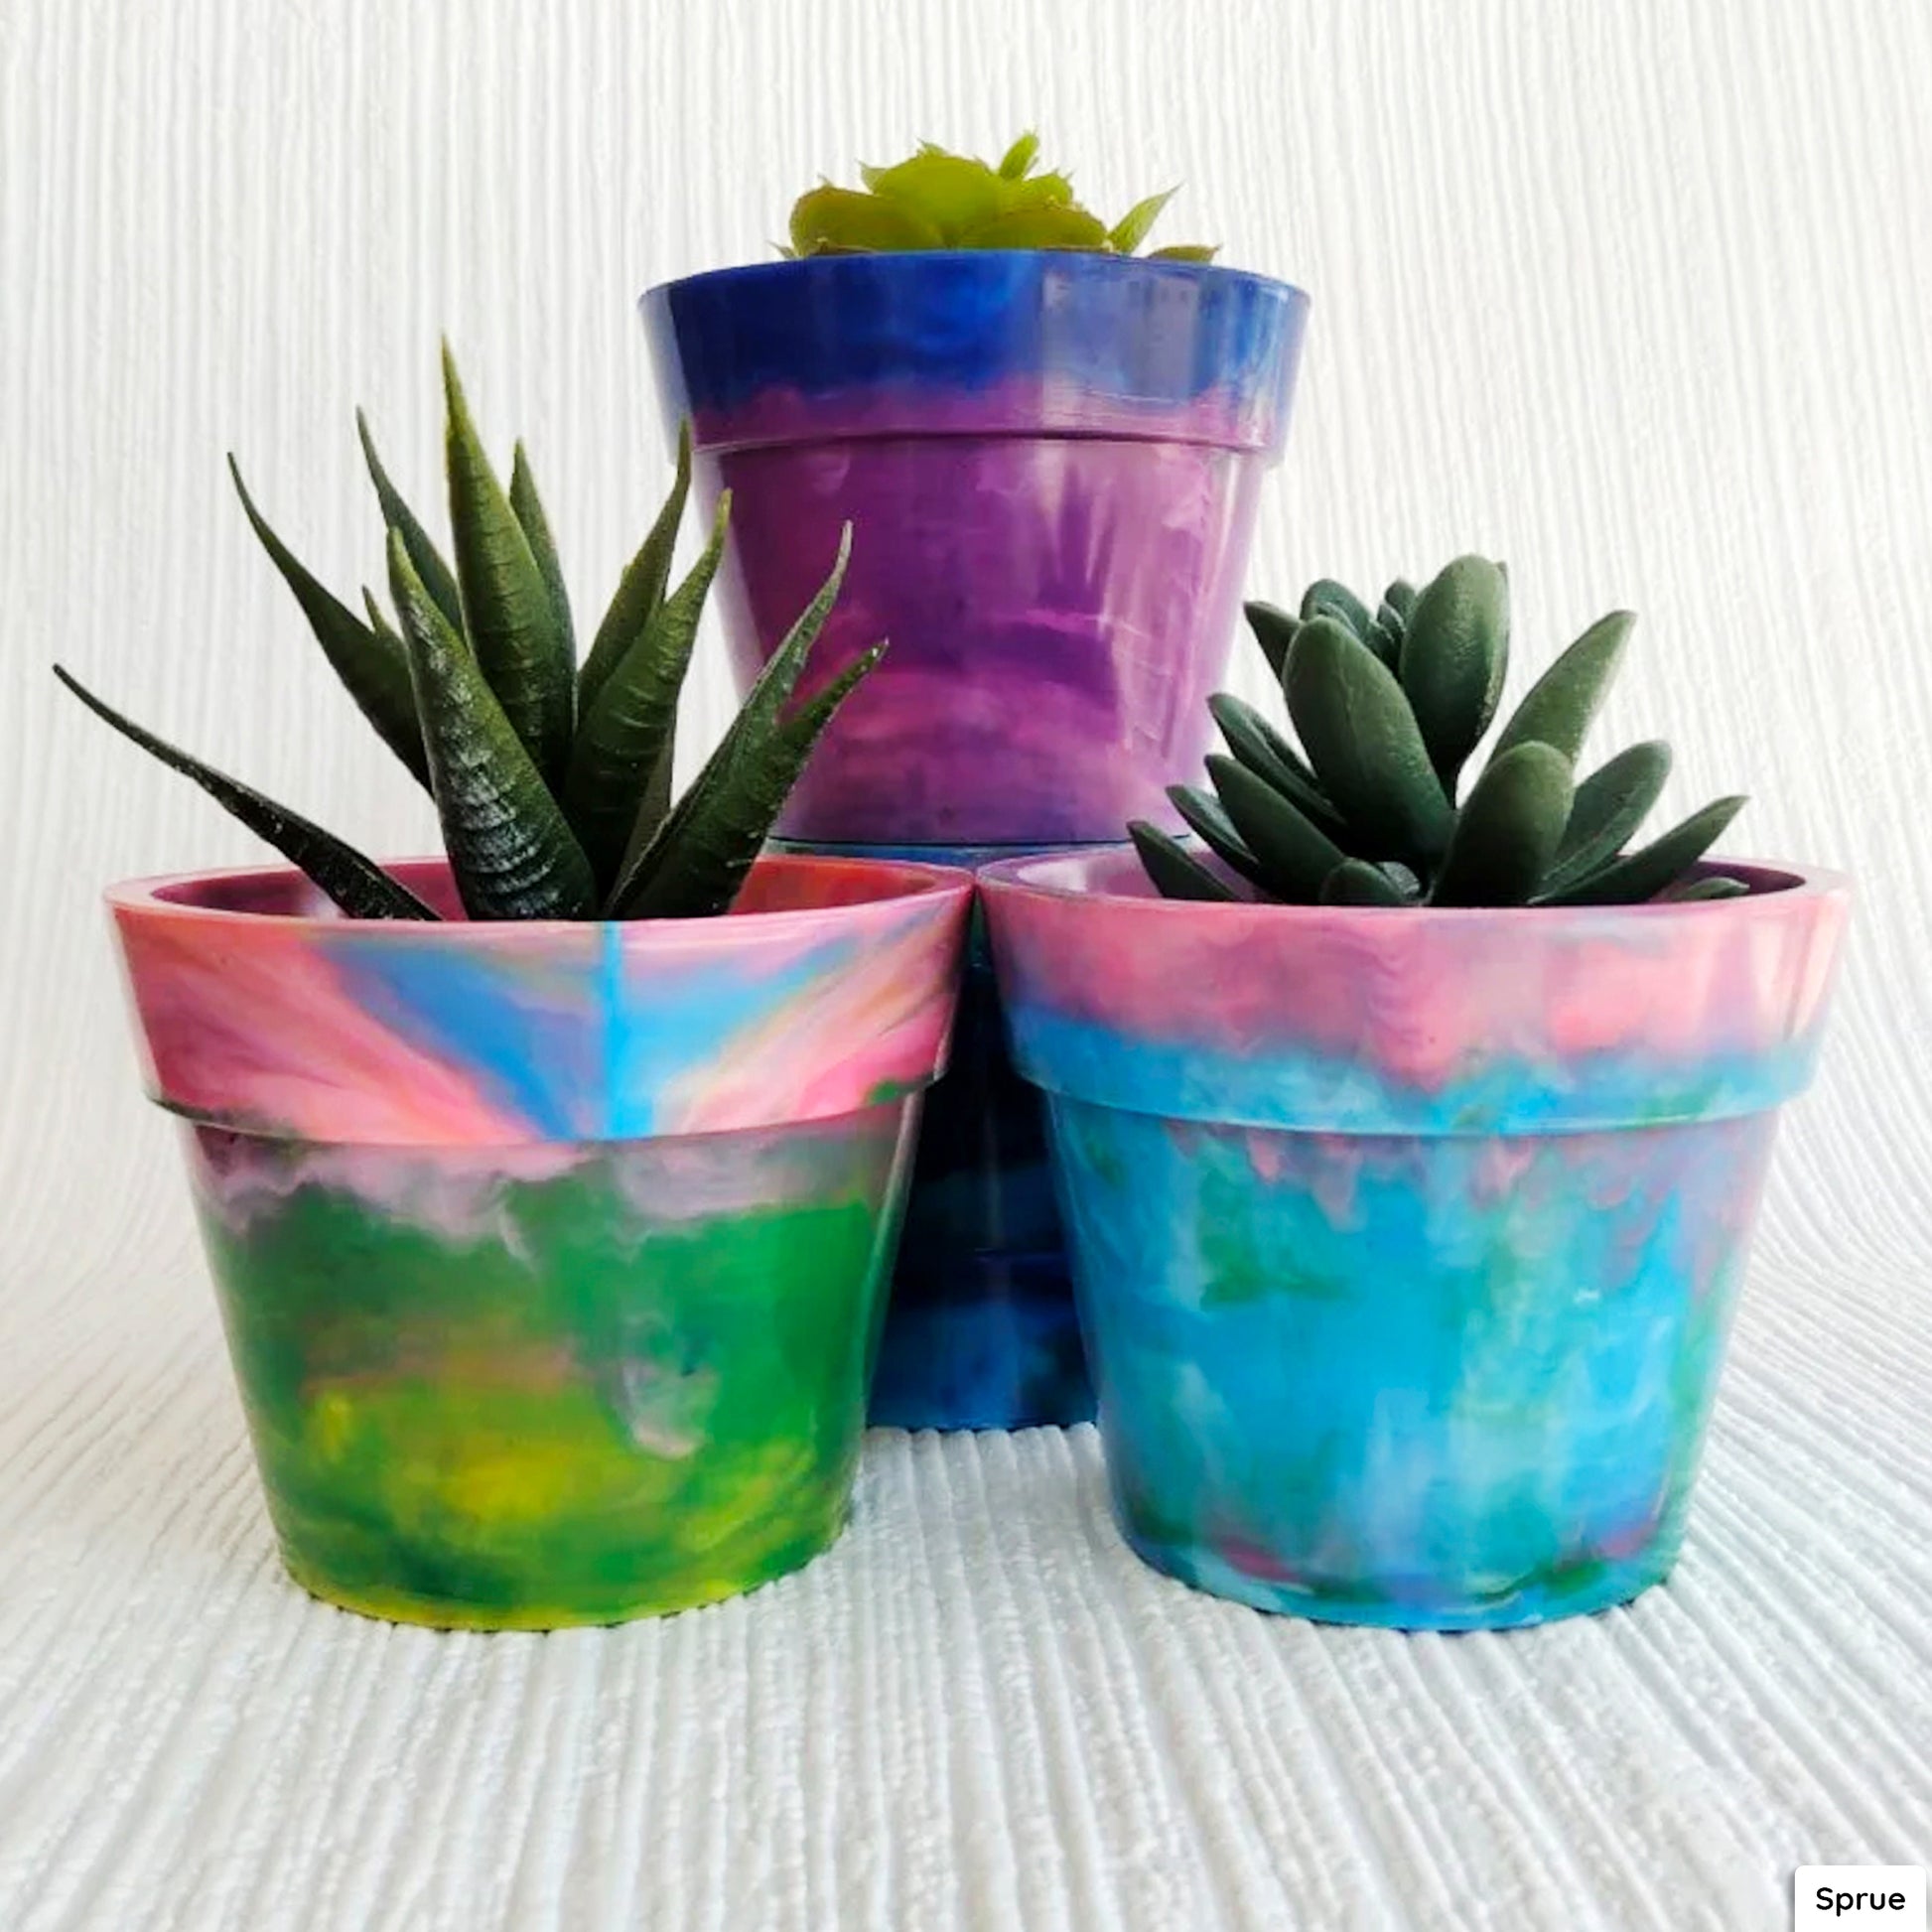 Recycled plastic pots from Sprue Plastic at RMS Recycle